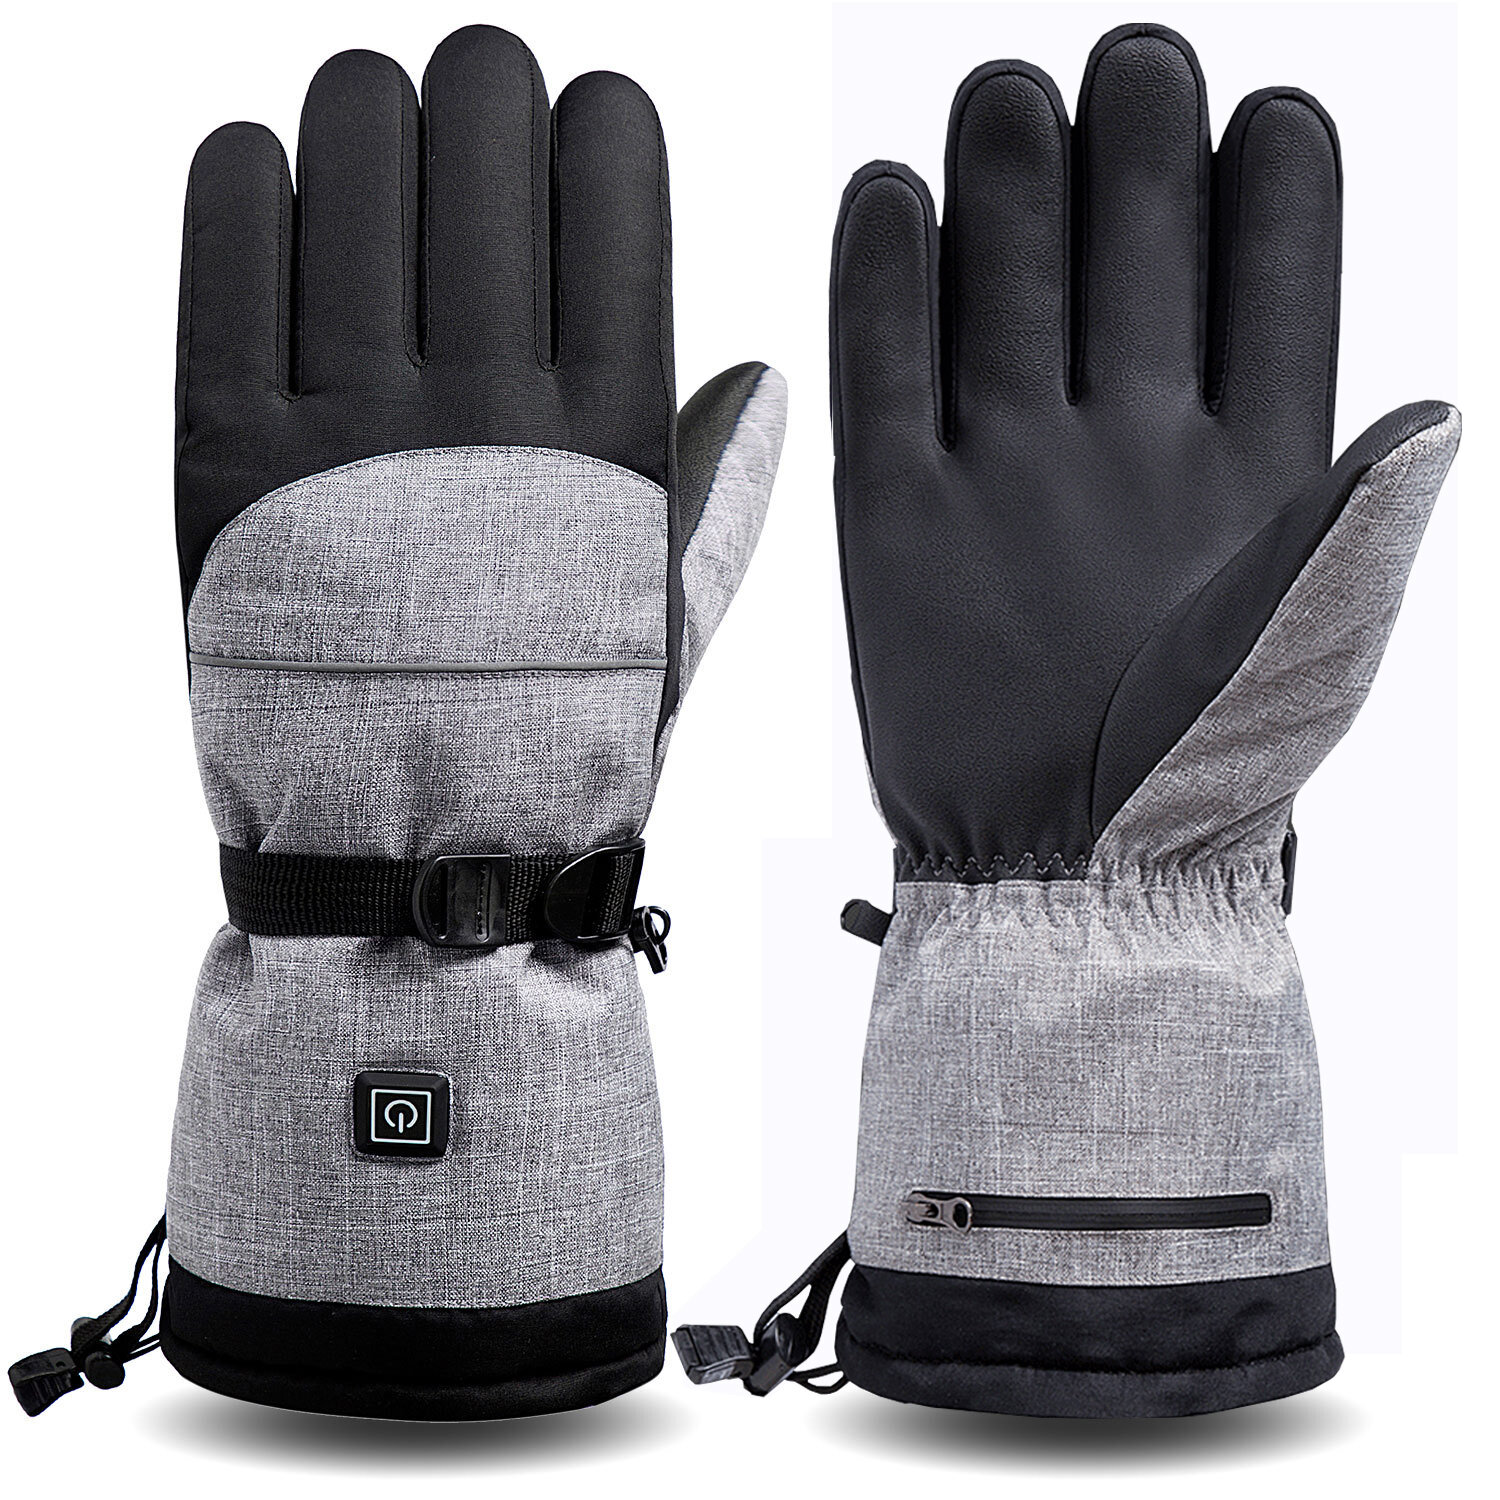 3 Gear Temperature Control Motorcycle Riding Gloves + 5000mAh Battery Winter Heated Warm Gloves for Outdoor Sports